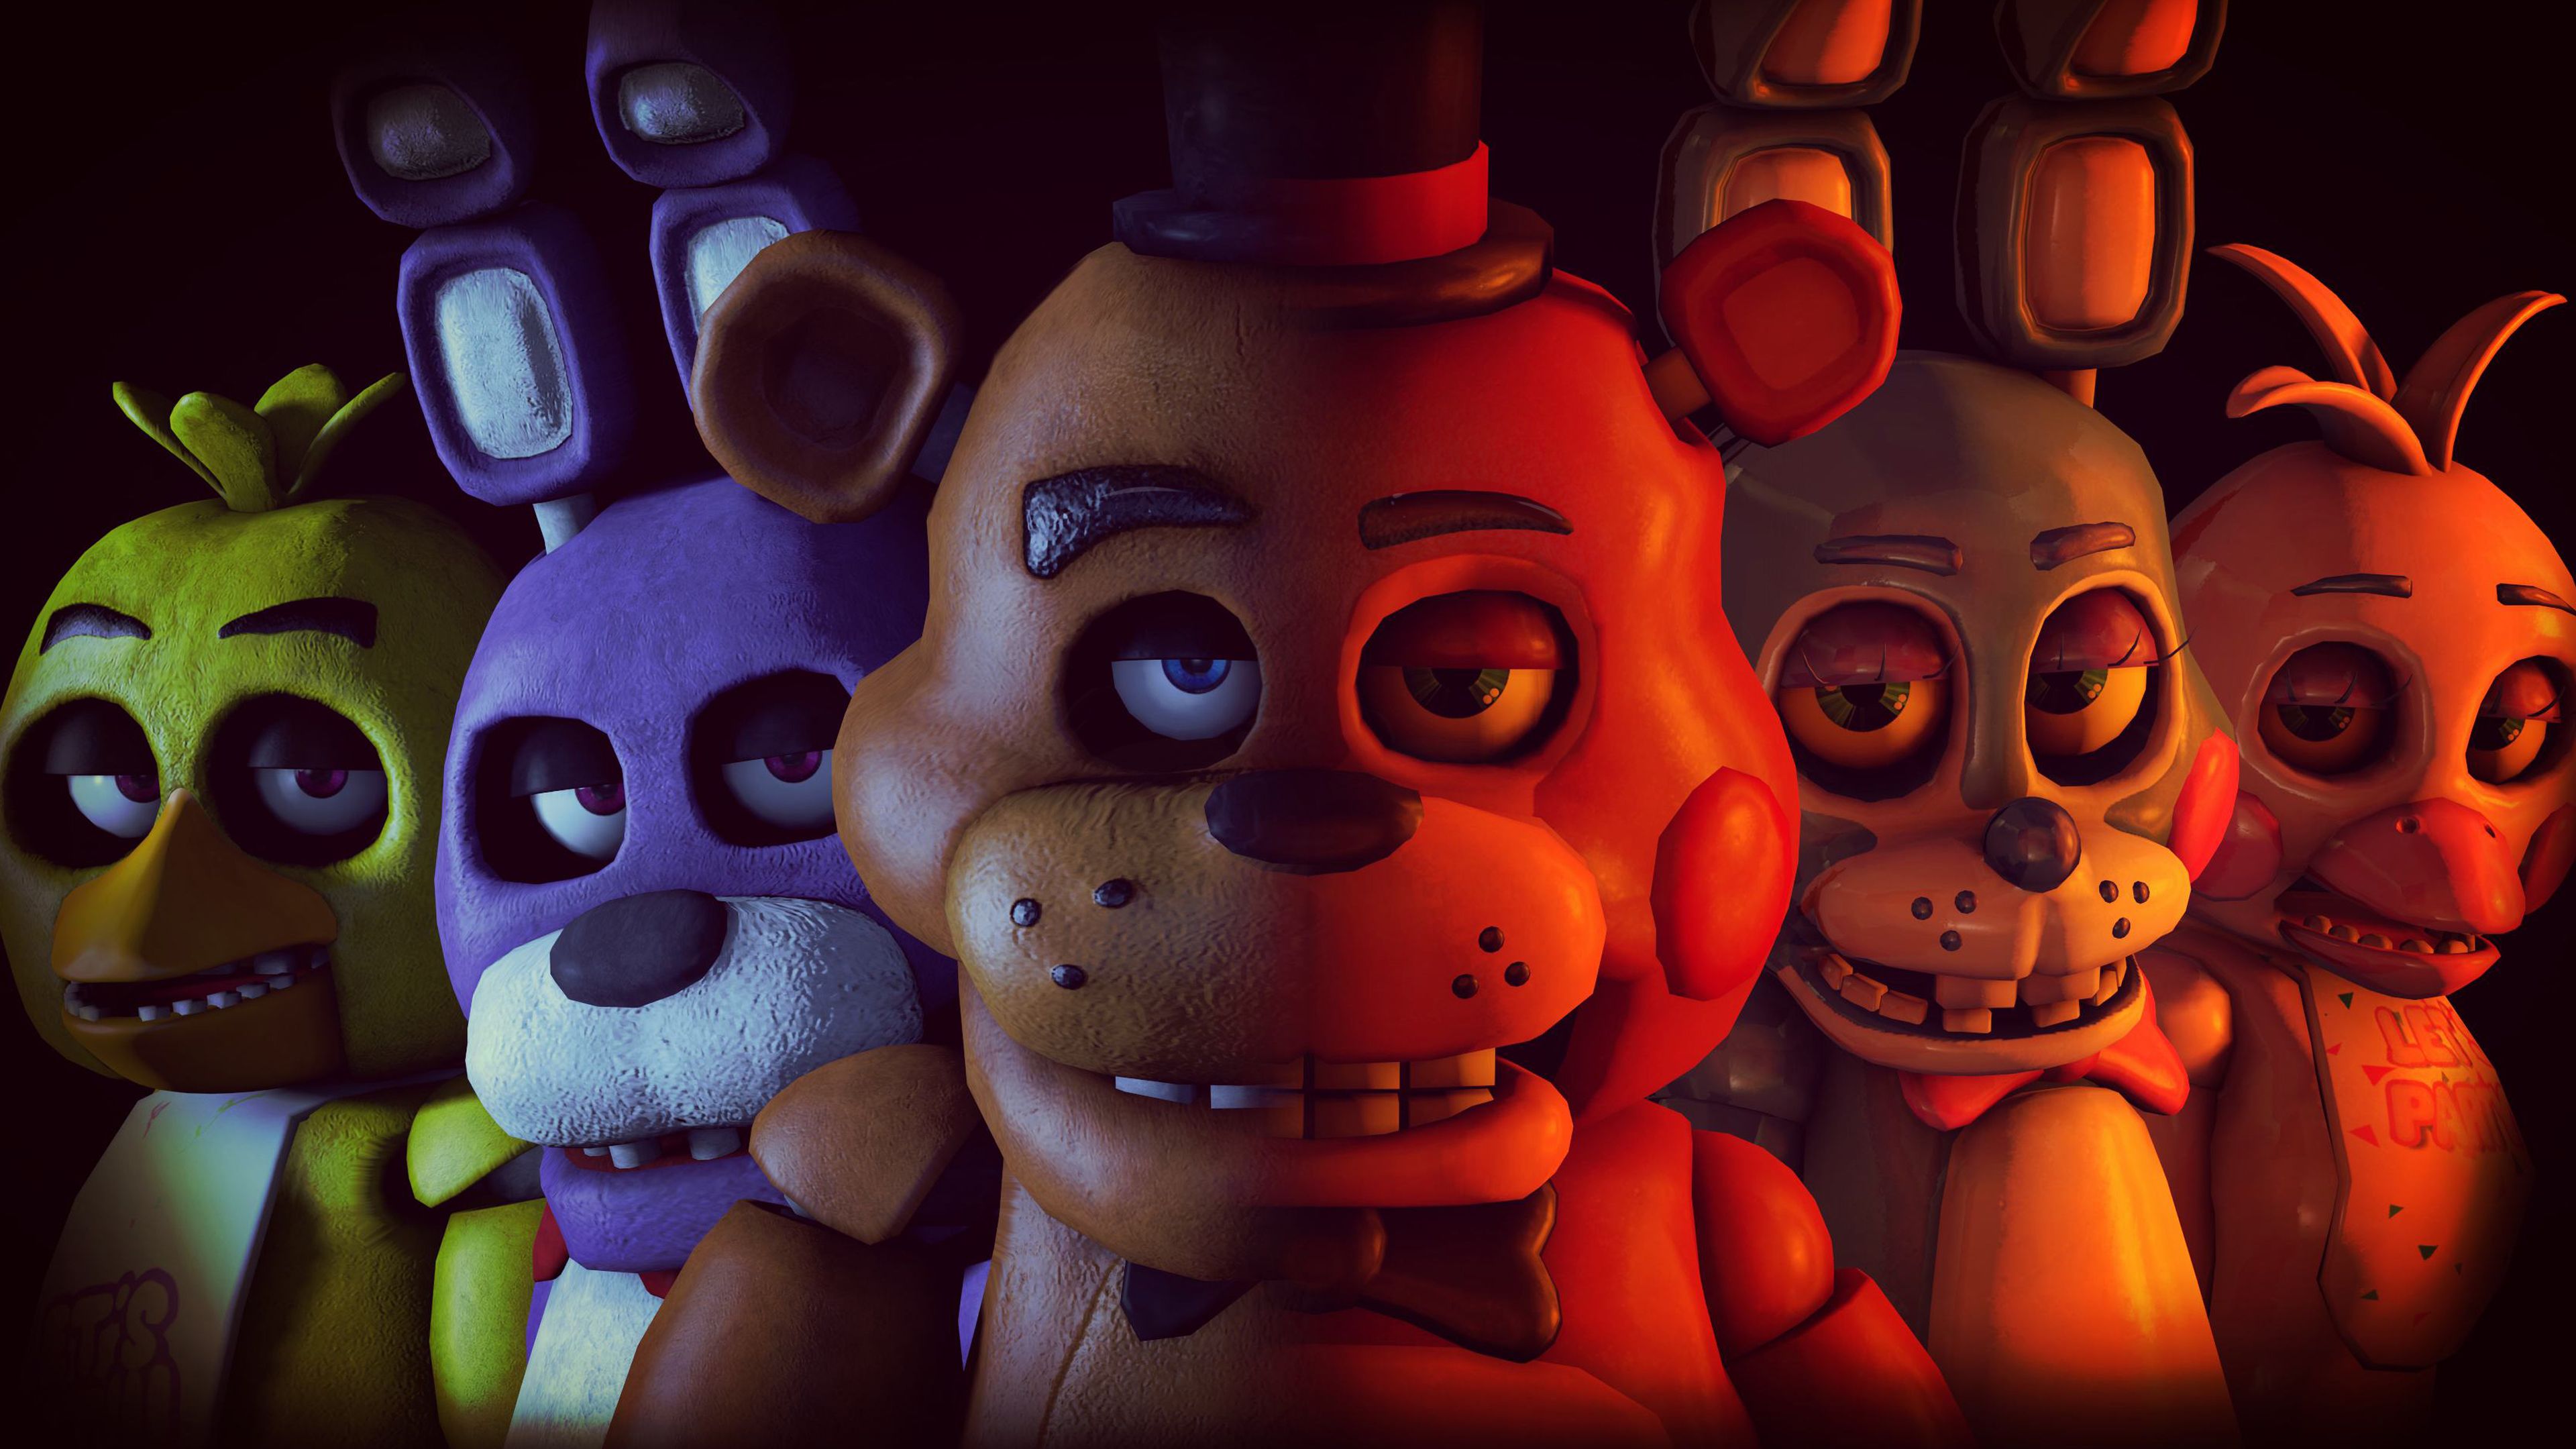 HD wallpaper Five Nights at Freddys Five Nights At Freddys 2 Balloon  Boy Five Nights at Freddys  Wallpaper Flare